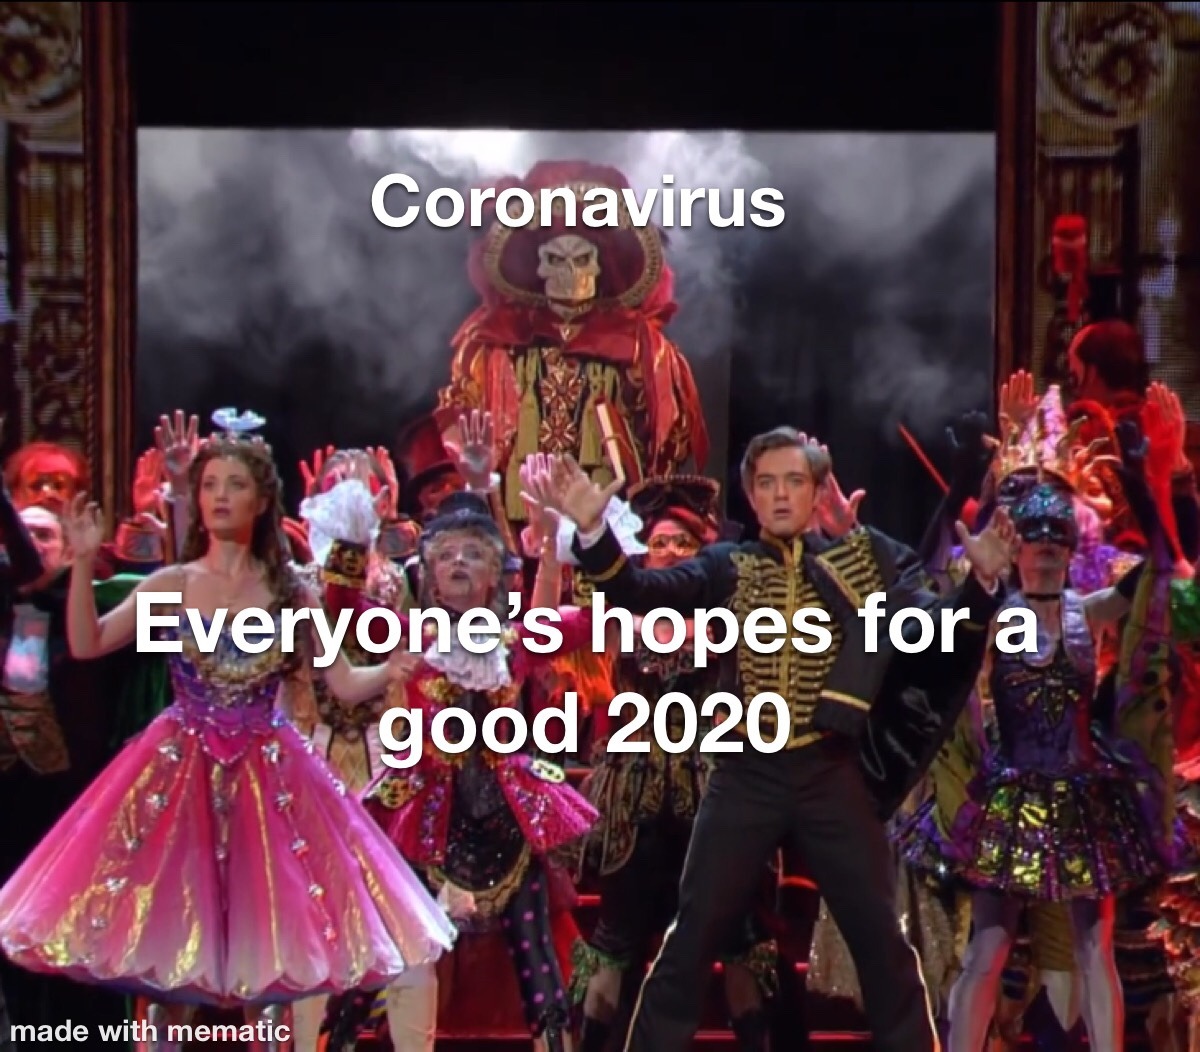 stage - Coronavirus Everyone's hopes for a good 2020 made with mematic